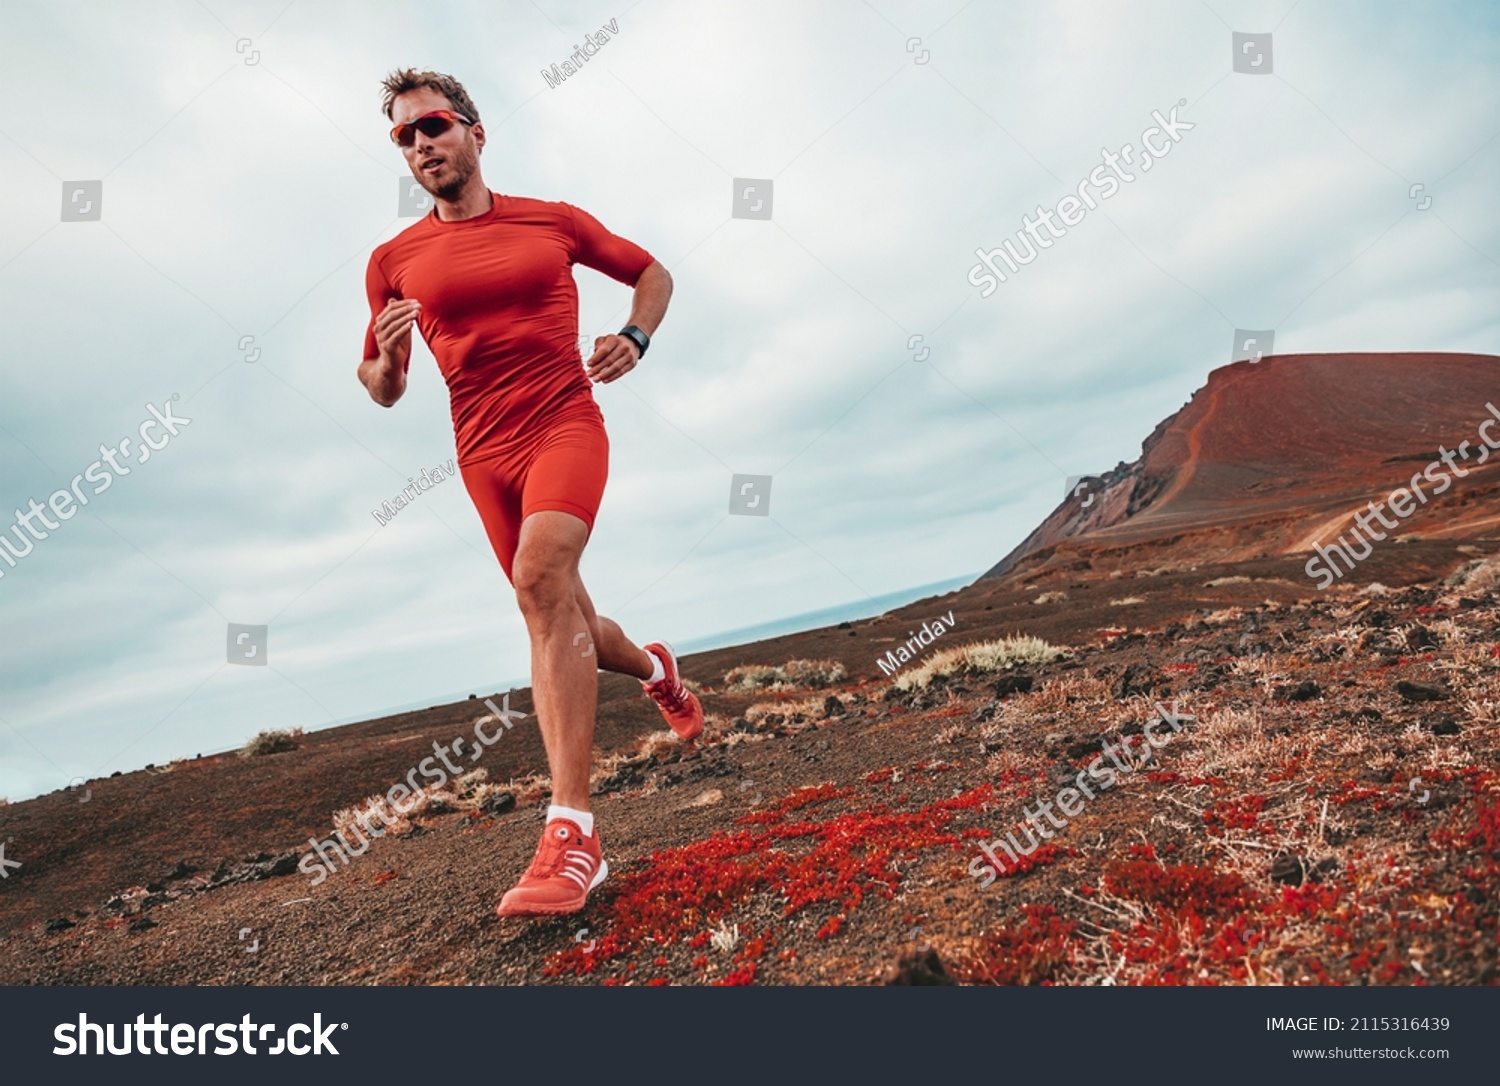 Running marathon man runner sport athlete training ultra running on long distance endurance trail race wearing compression clothes, sunglasses smartwatch wearable device. #2115316439